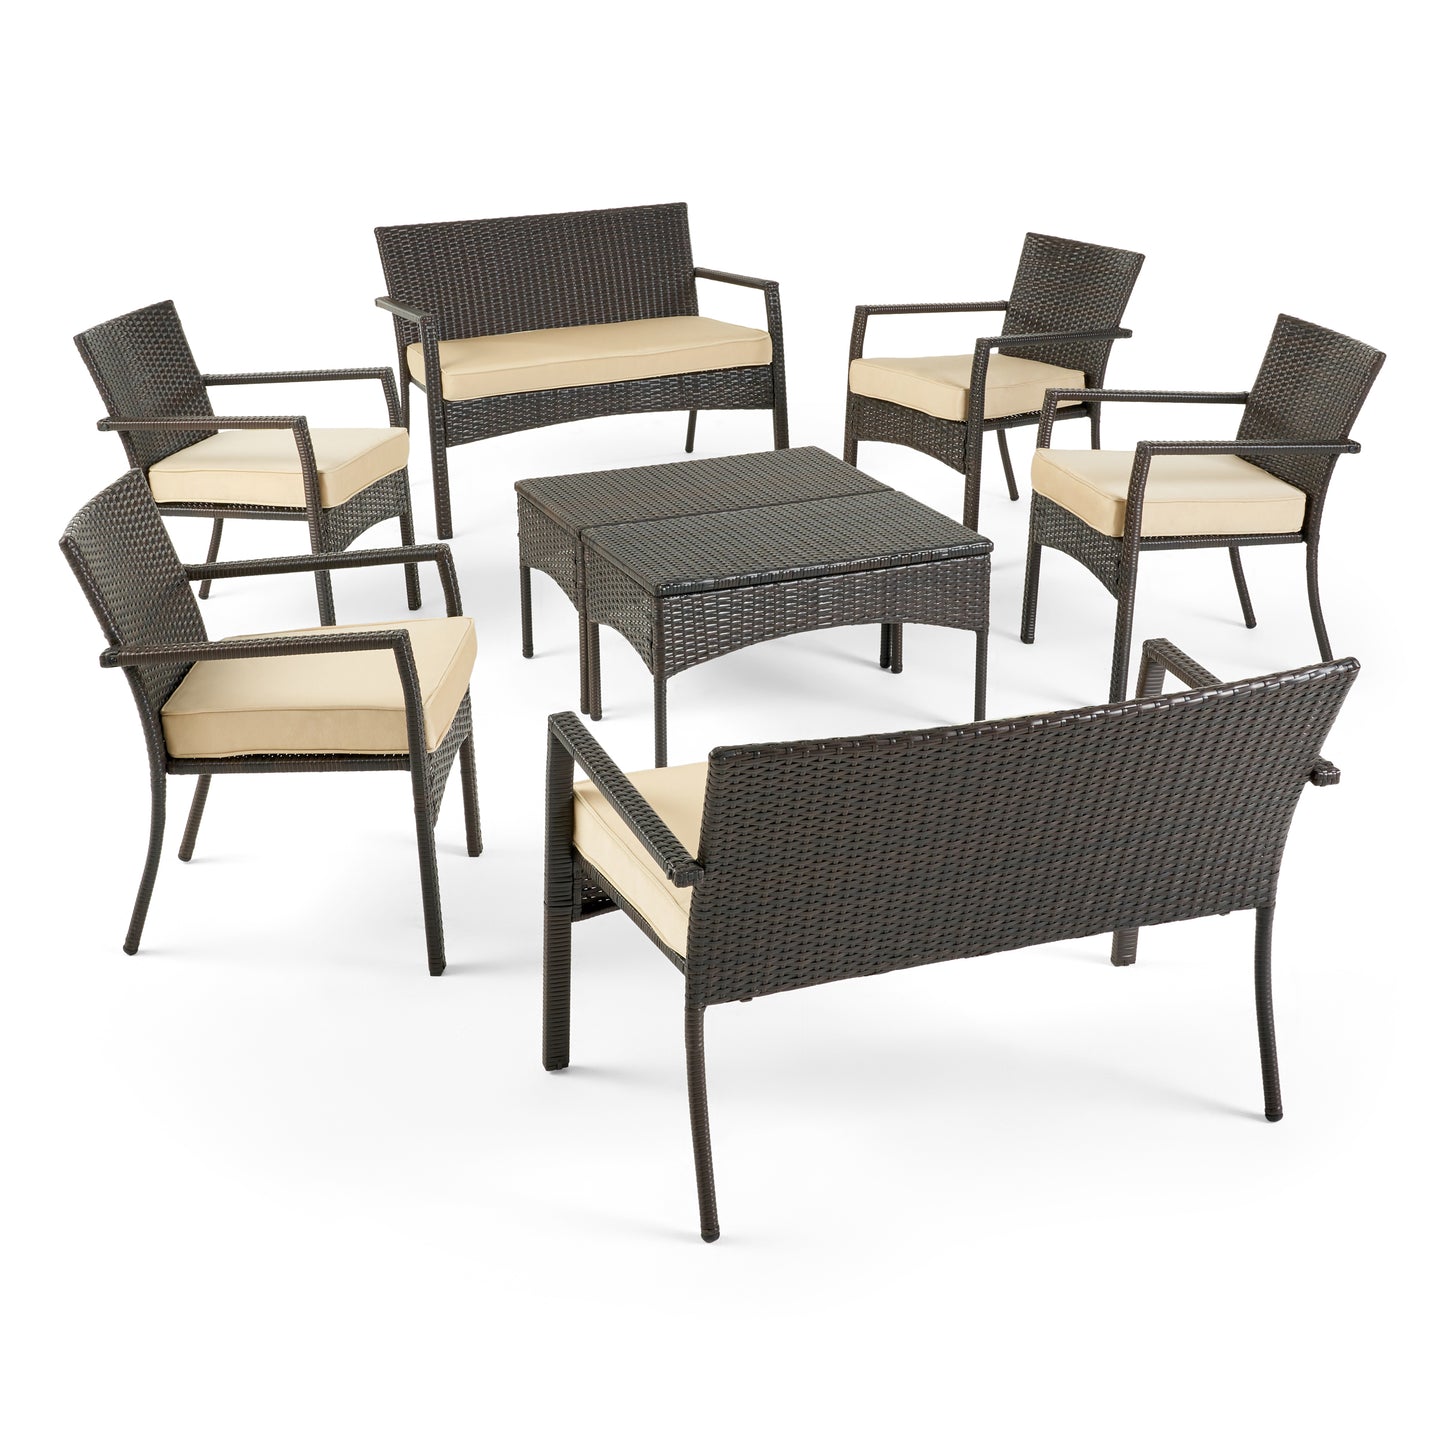 Tahiti Outdoor 8 Seater Wicker Chat Set with Cushions